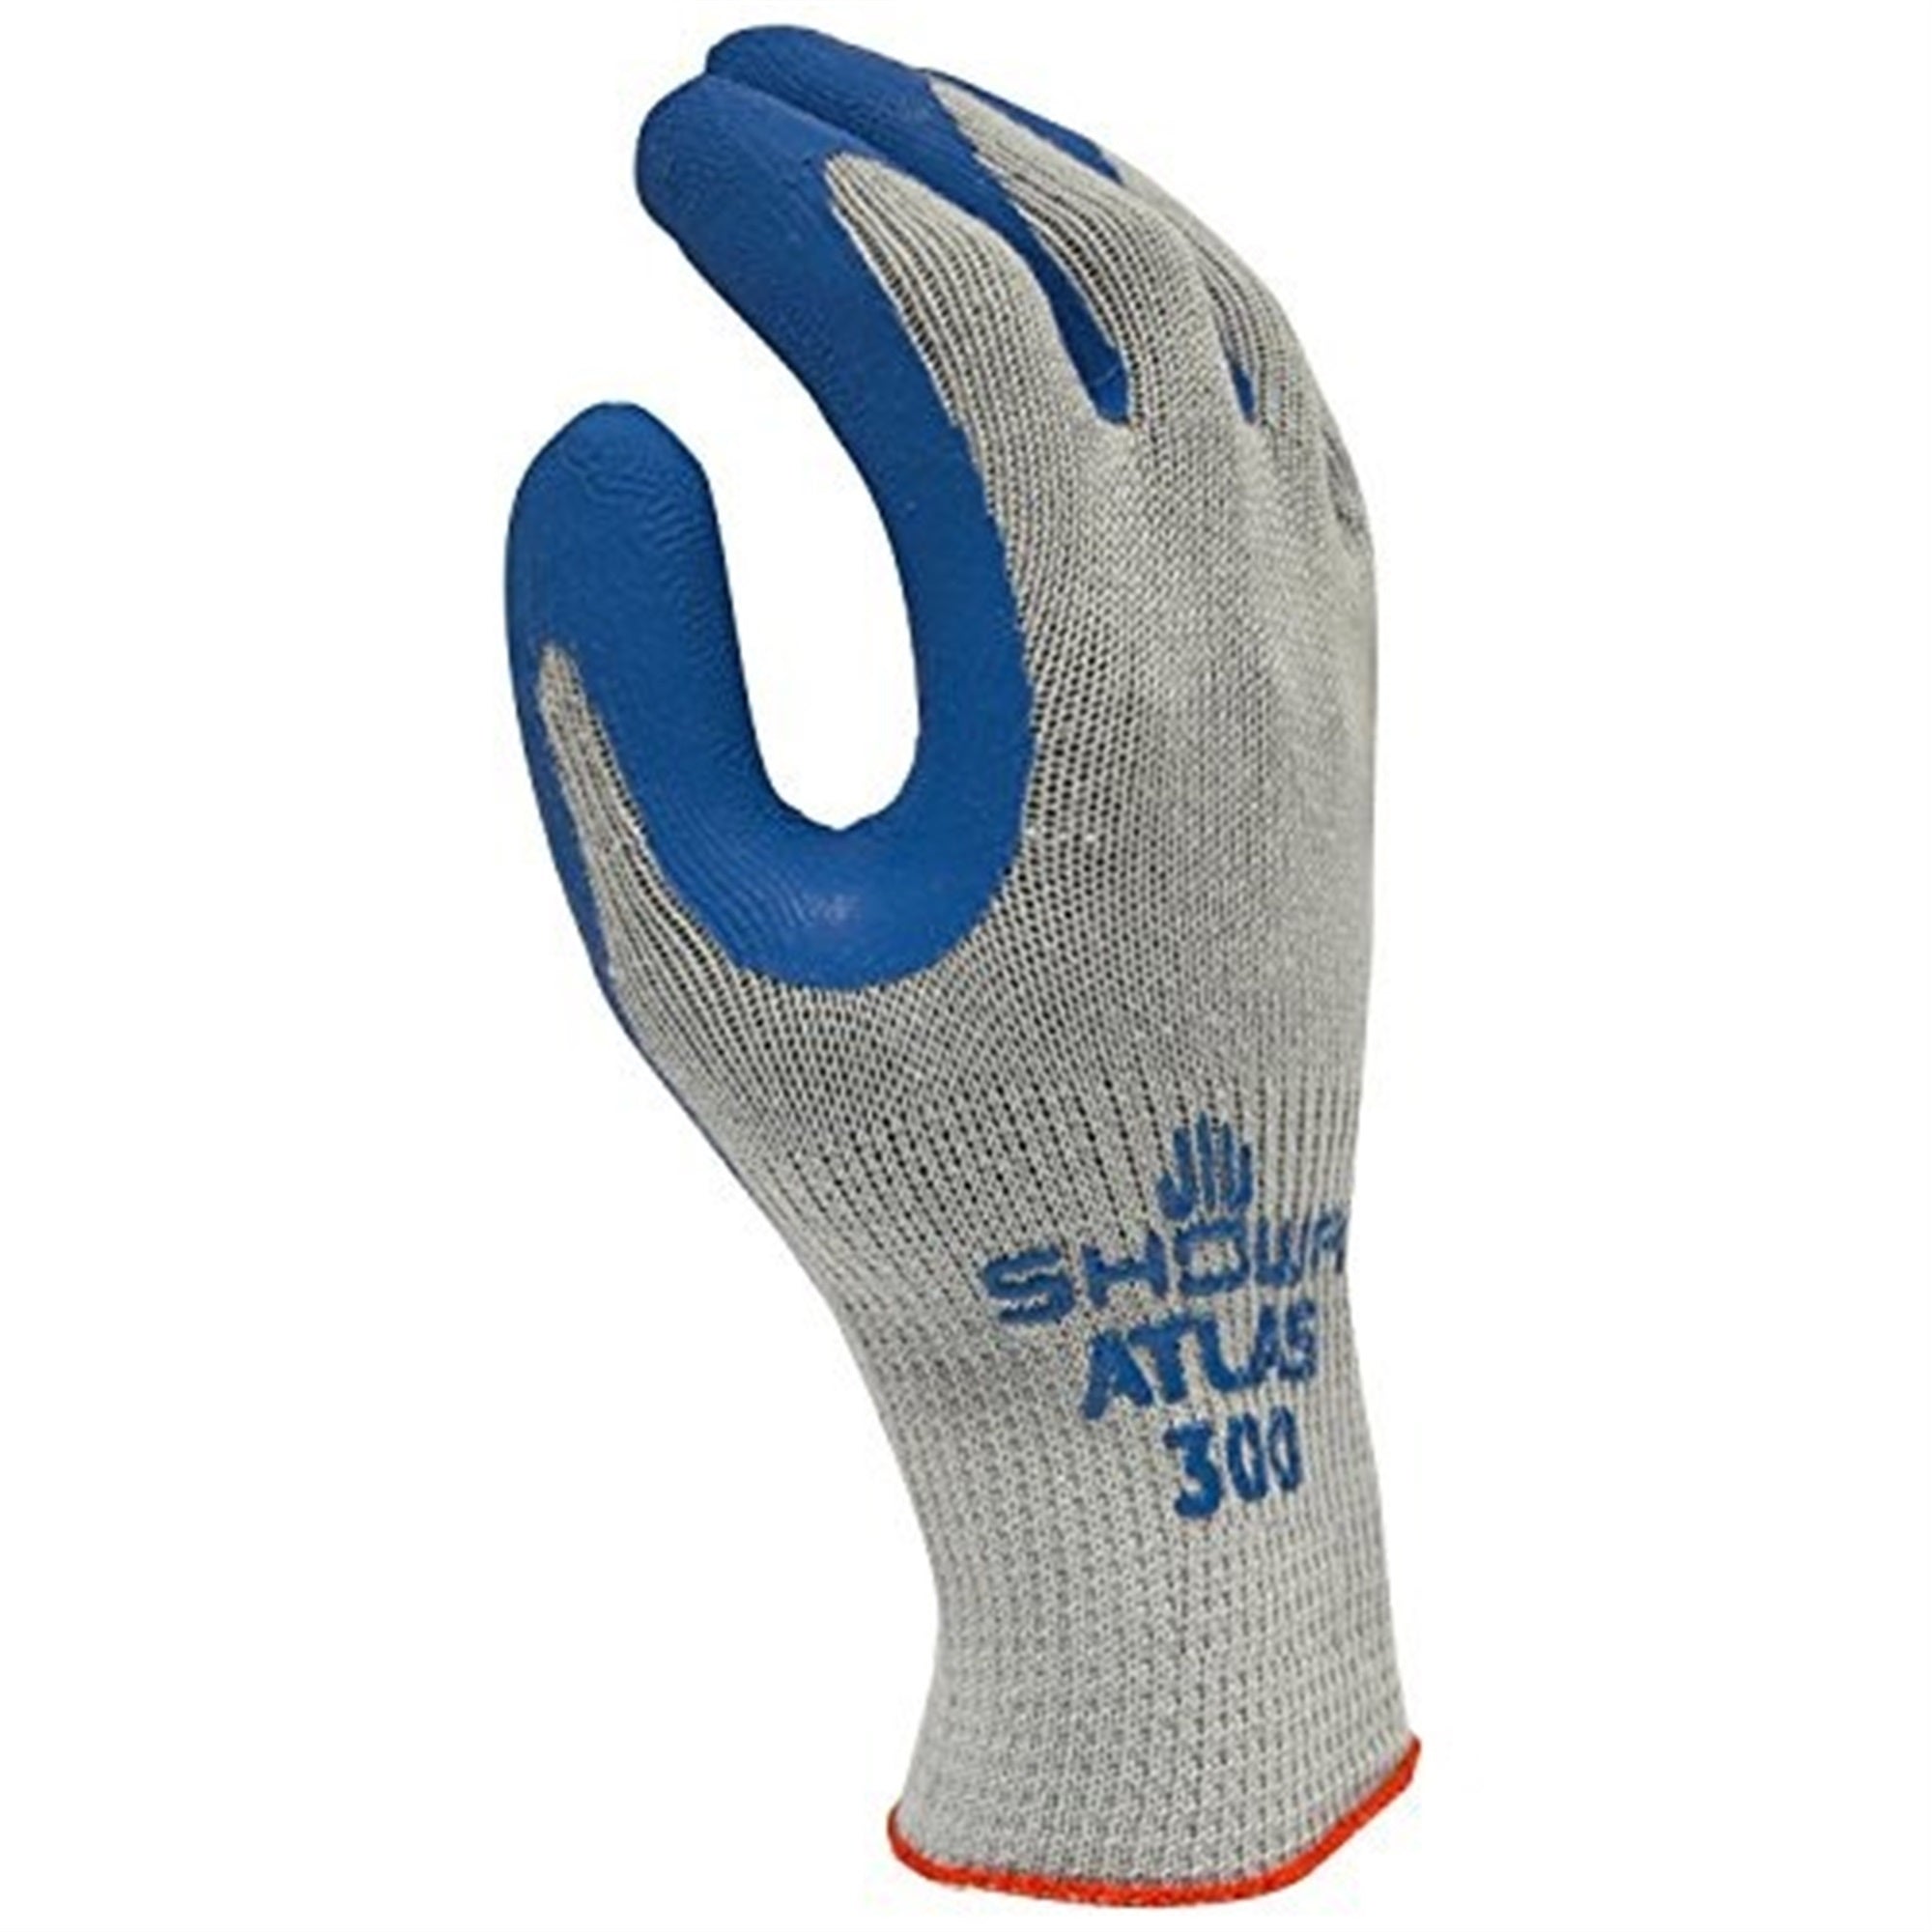 Showa Atlas Latex Coated Glove, Grey and Blue, Size XL